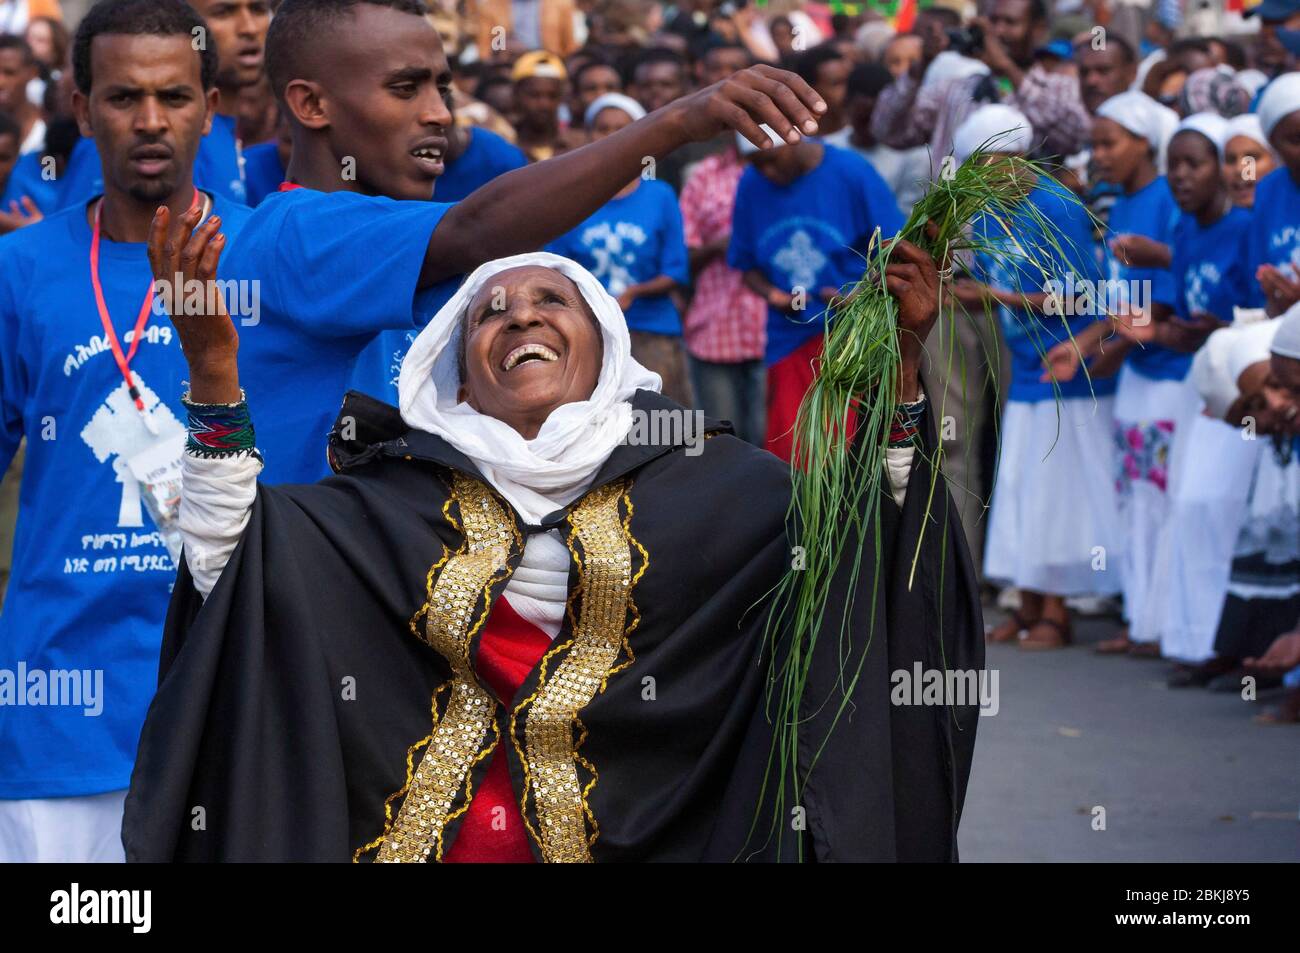 Ethiopia, Gondar, people jubilation during the procession marking the Timkat festival, or Epiphany, and the 200 th anniversary of the death of the Theodros king, ecstatic woman Stock Photo